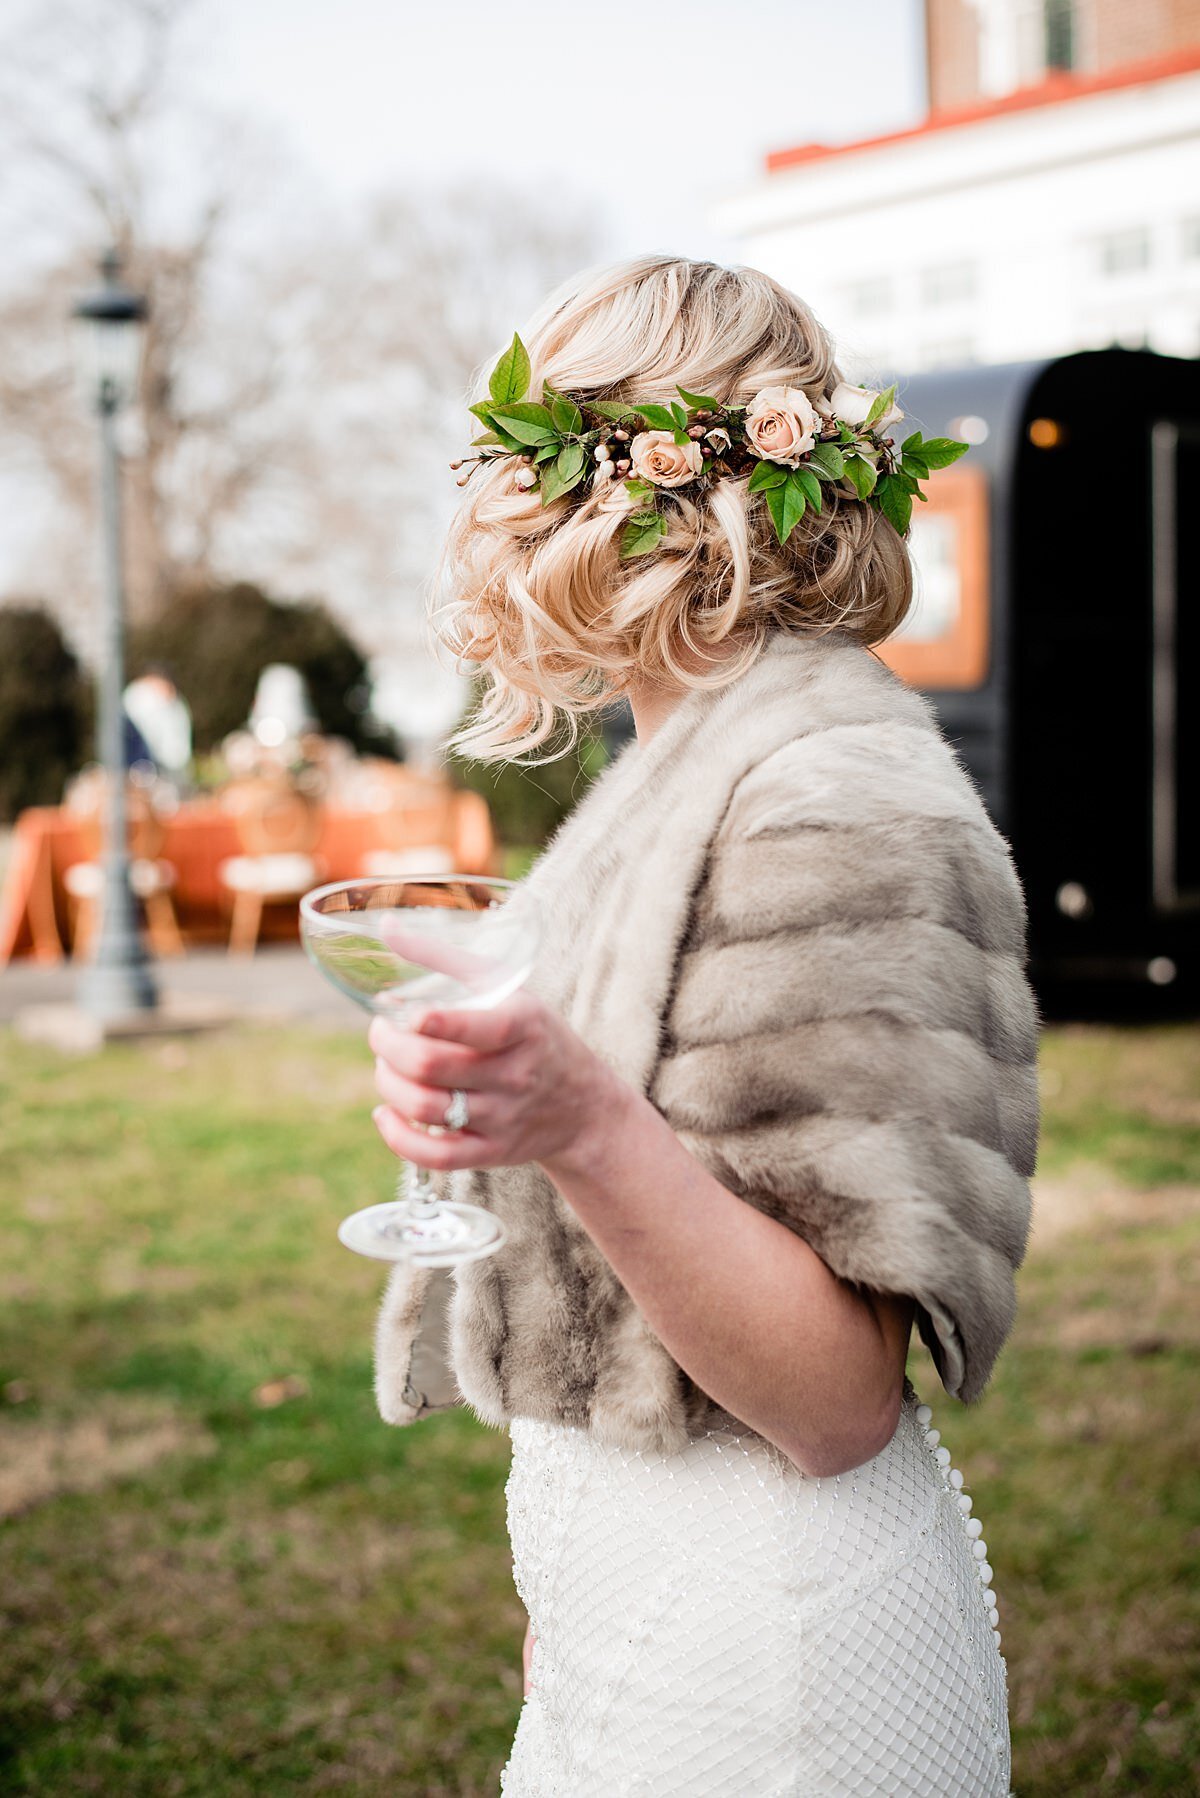 A bride in a lace mermaid dress with buttons down the back wearing a light brown fur wrap is holding a coupe glass of champagne as she looks away from the camera showing off her flower crown of lemon leaves and blush tea roses.